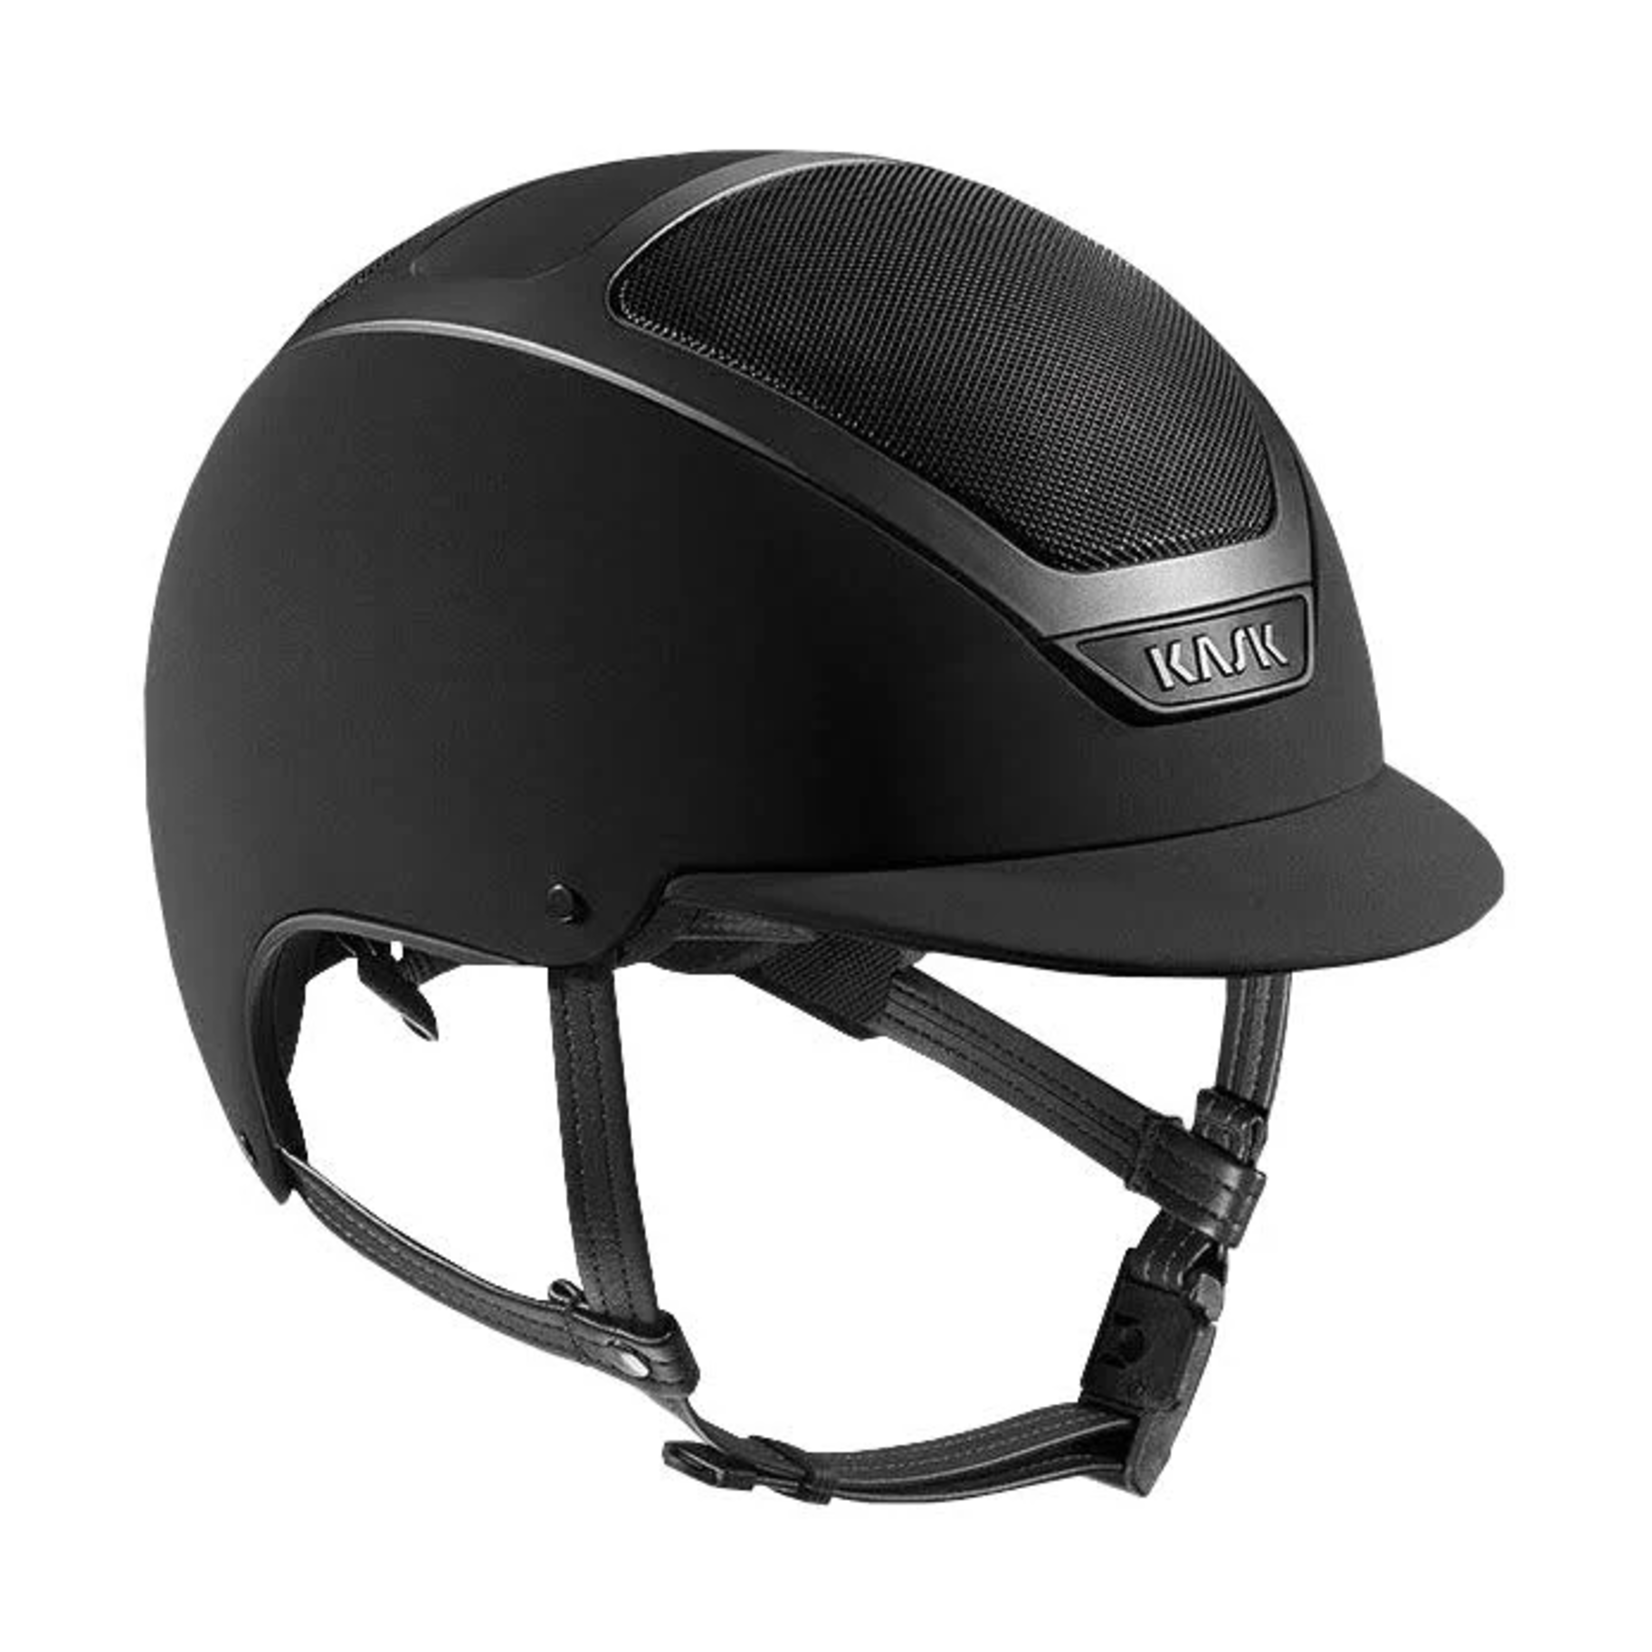 KASK Equestrian Kask Dogma Light Riding Helmet- Sold as a kit with coordinating liner (sold separately)